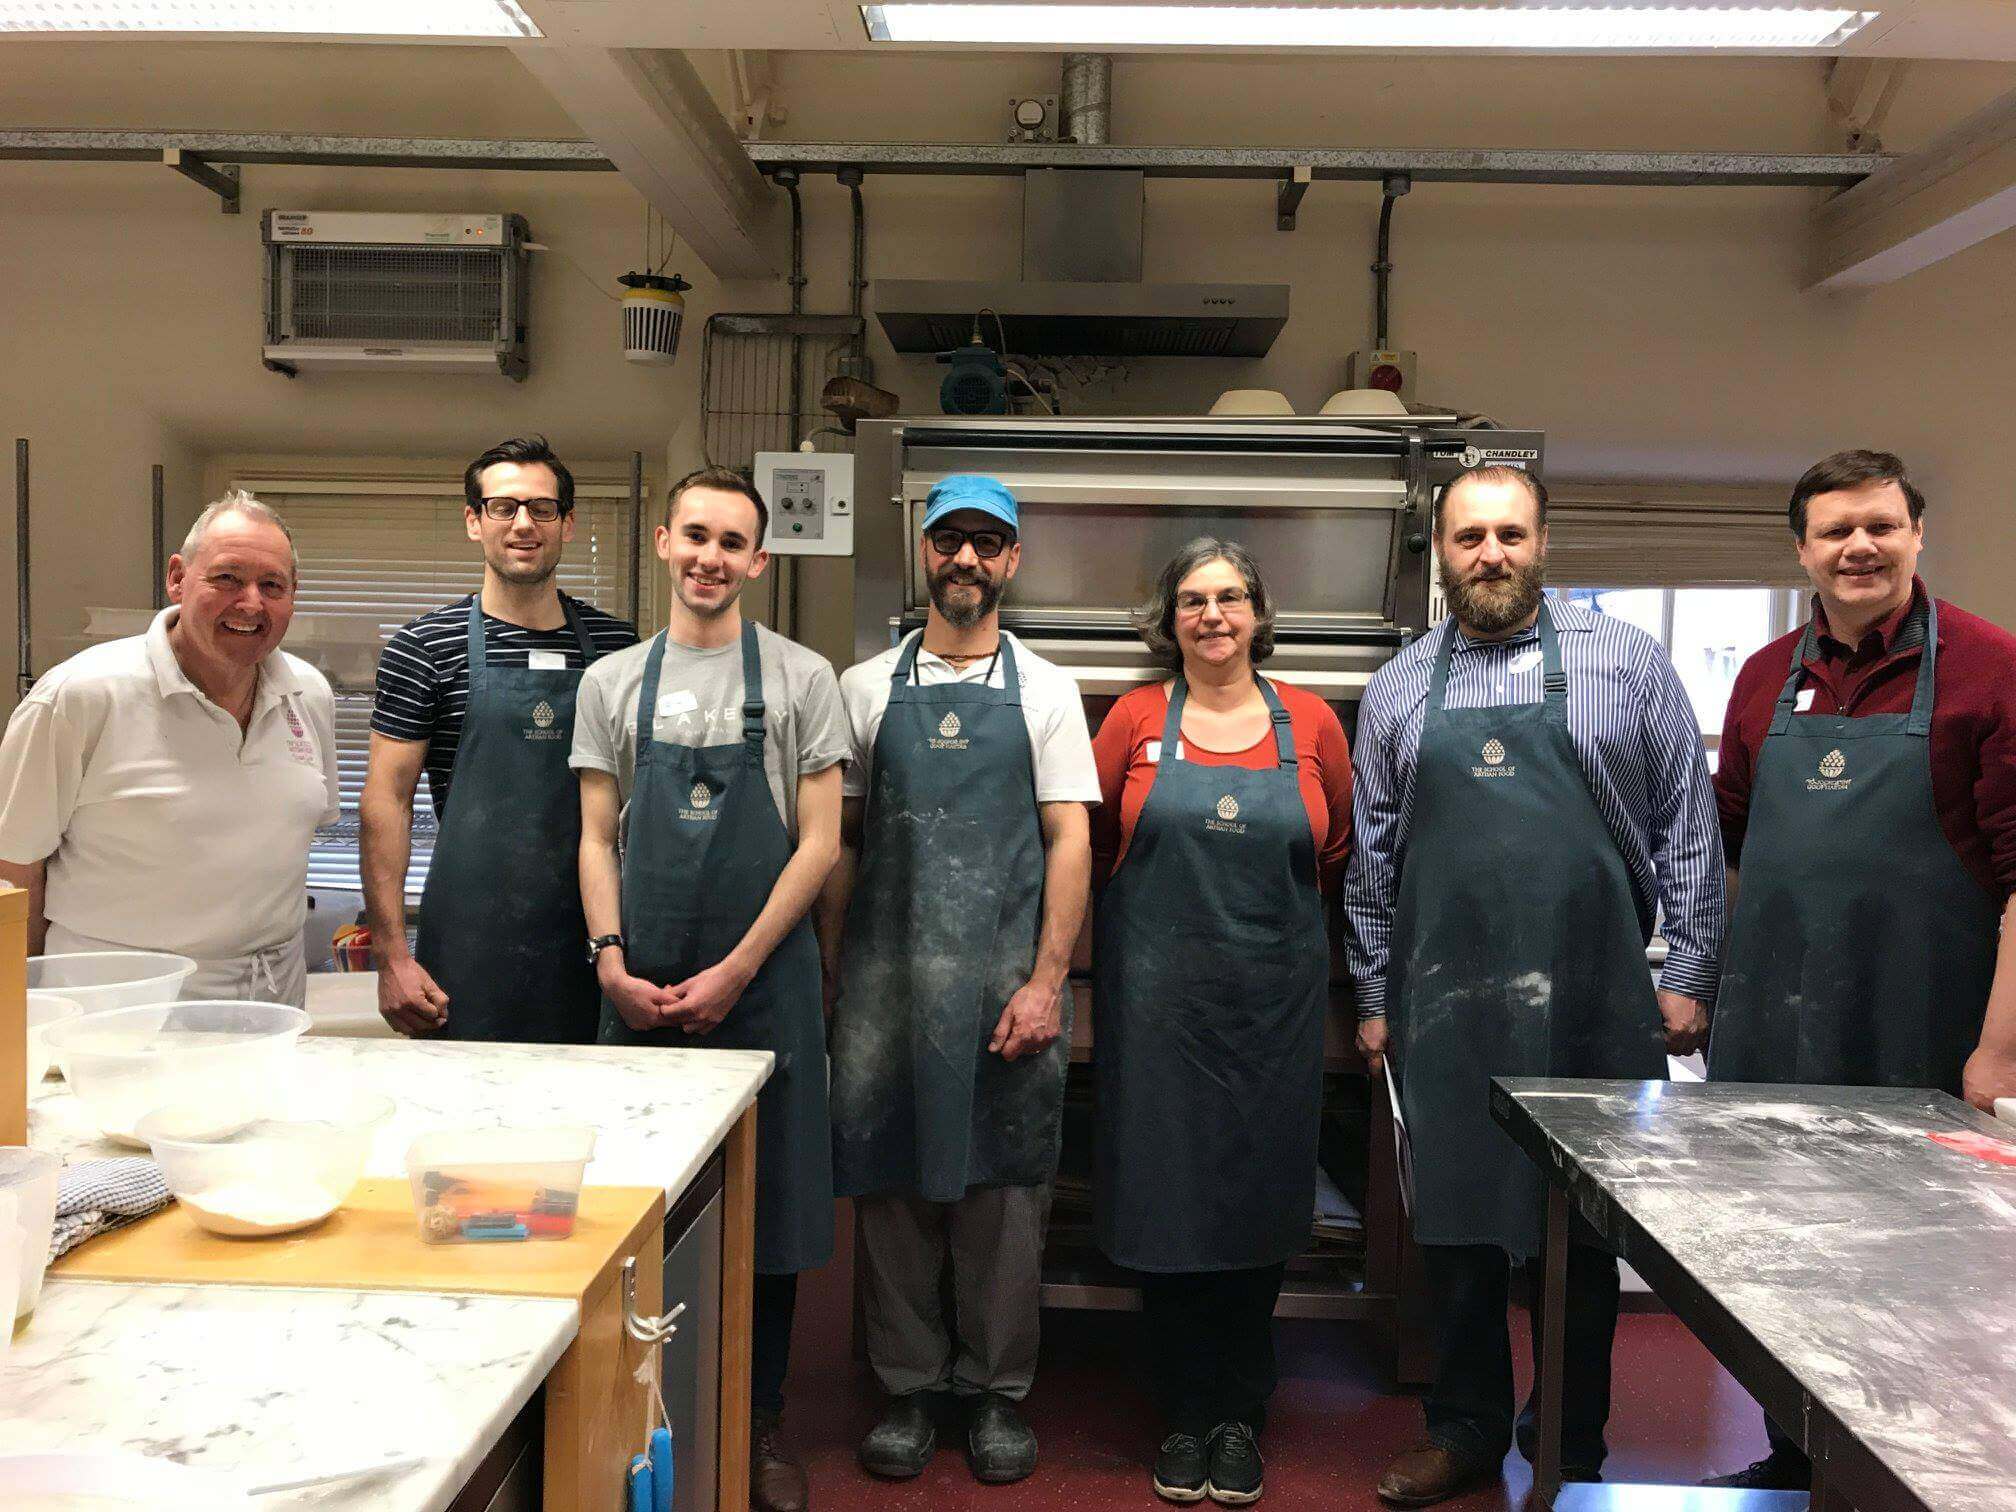 The SEO Works team at the School of Artisan Food and Baking class